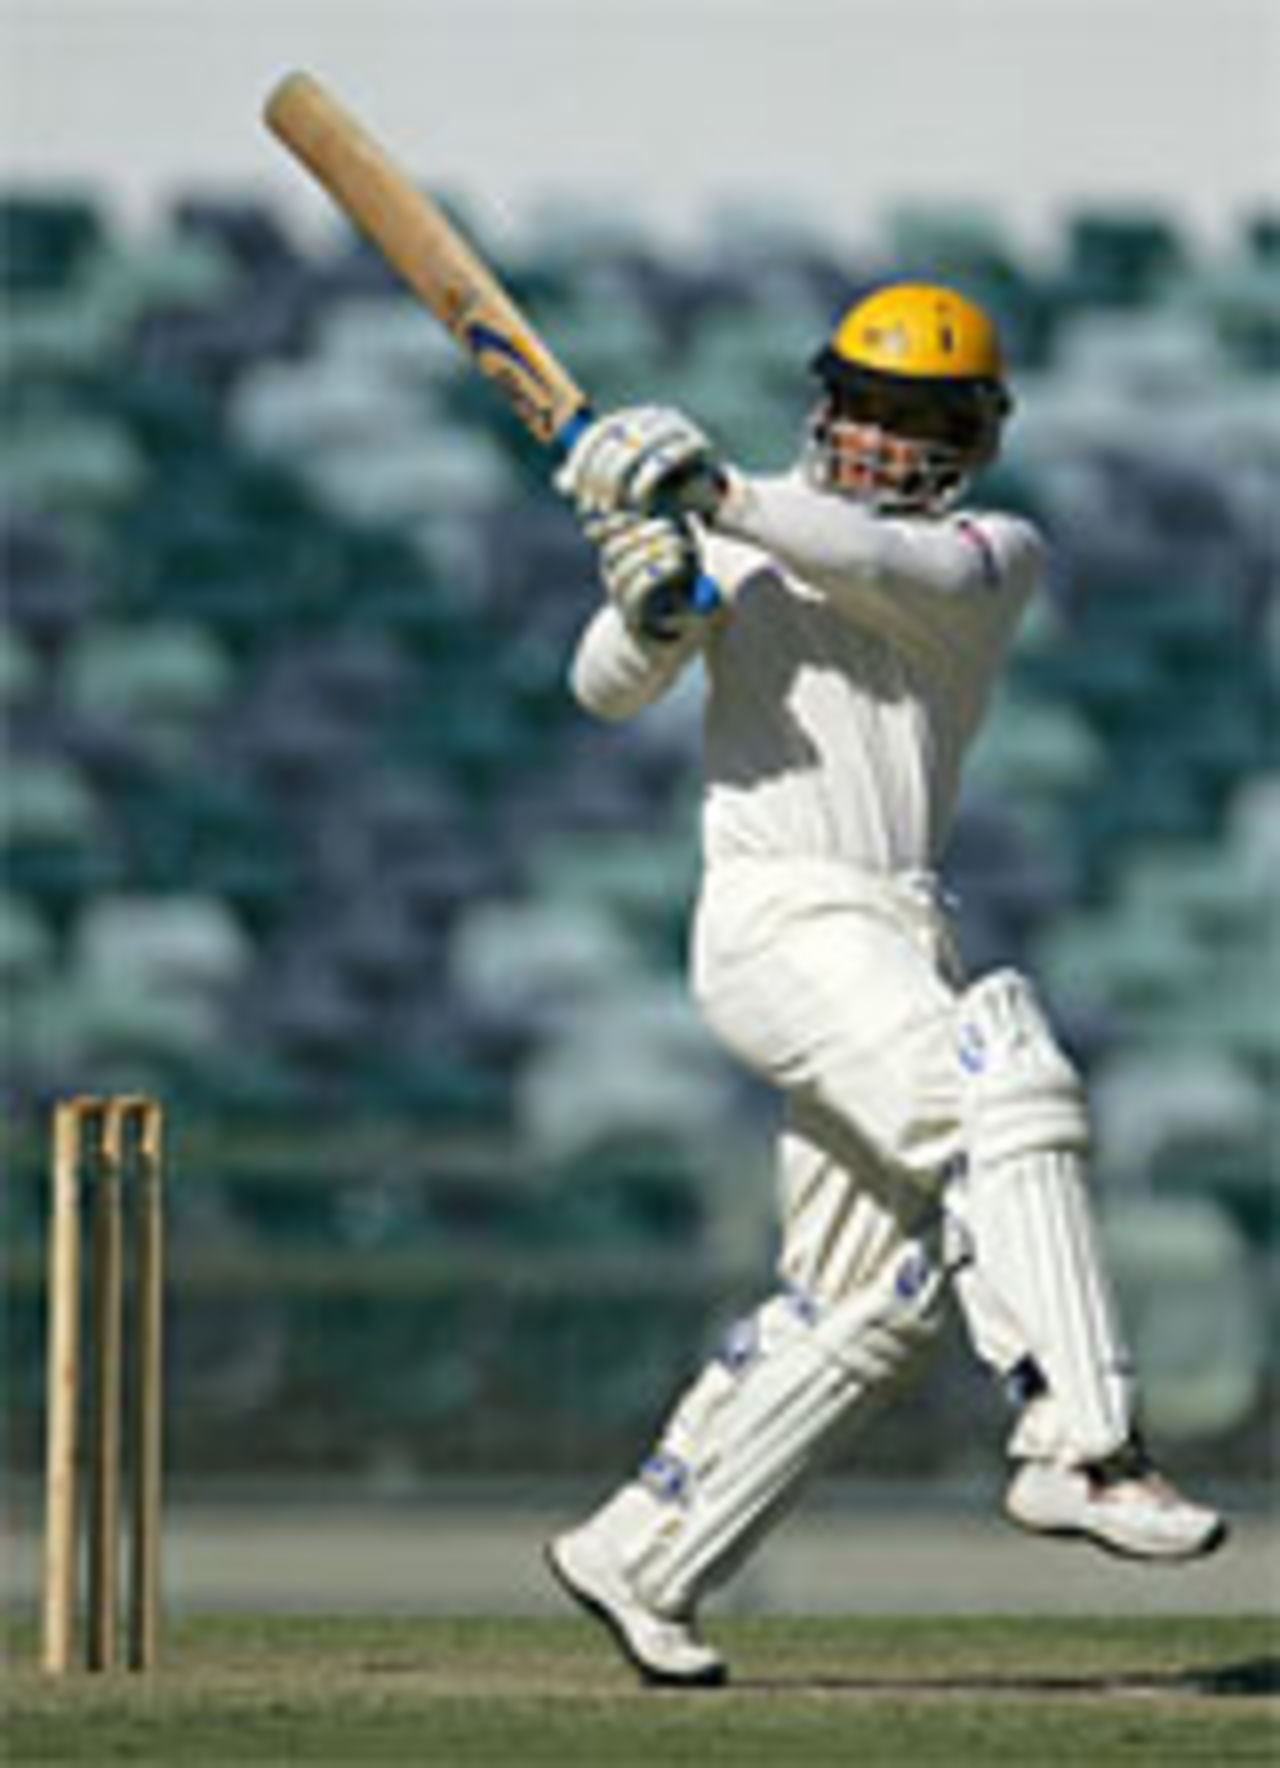 Justin Langer hits out as Western Australia romp to 10-wicket win over Pakistanis, December 11, 2004